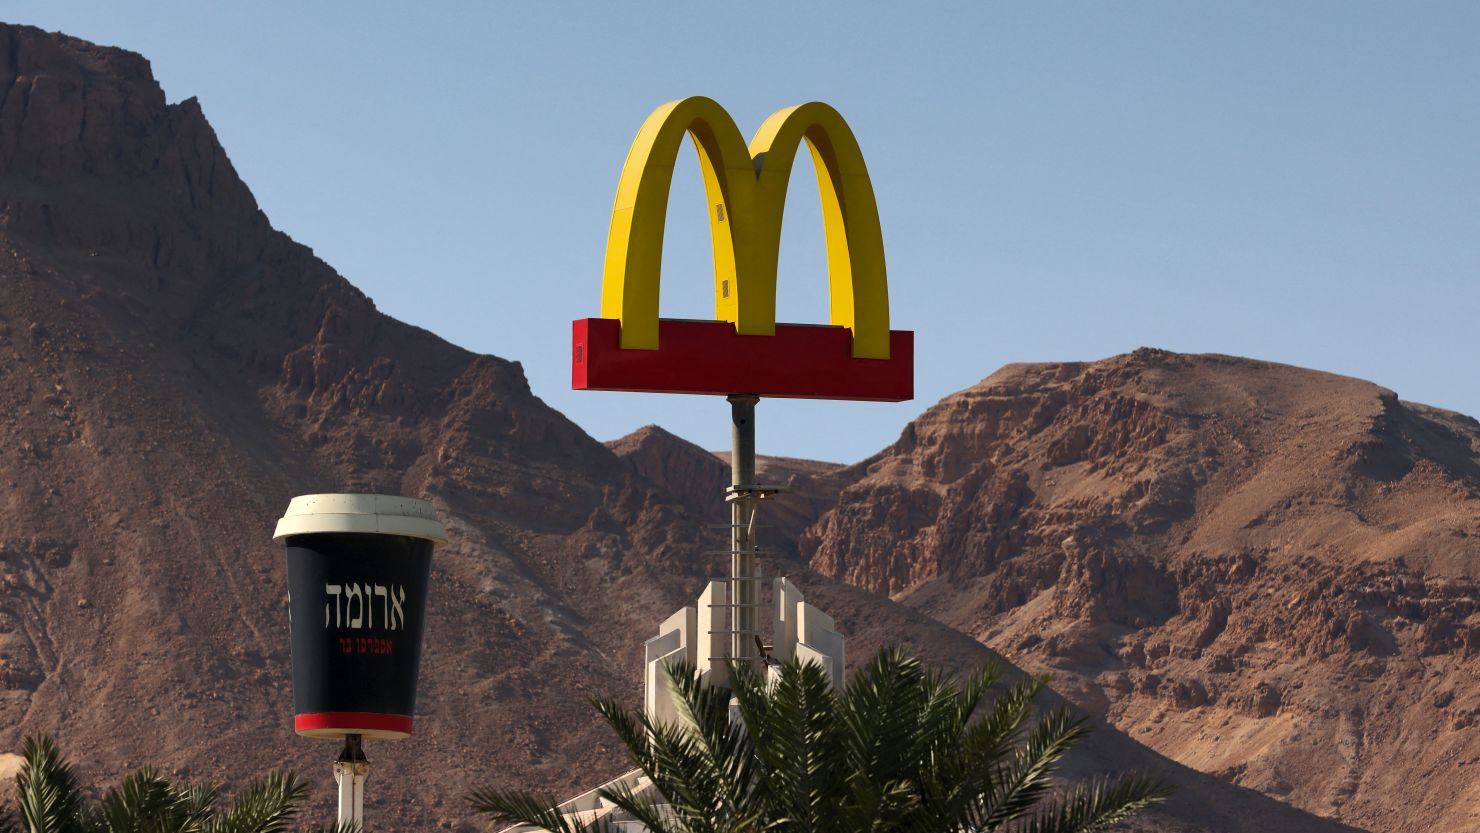 The “Golden Arches" of McDonald’s in the Israeli Dead Sea resort town of Ein Bokek, pictured in March 2021.